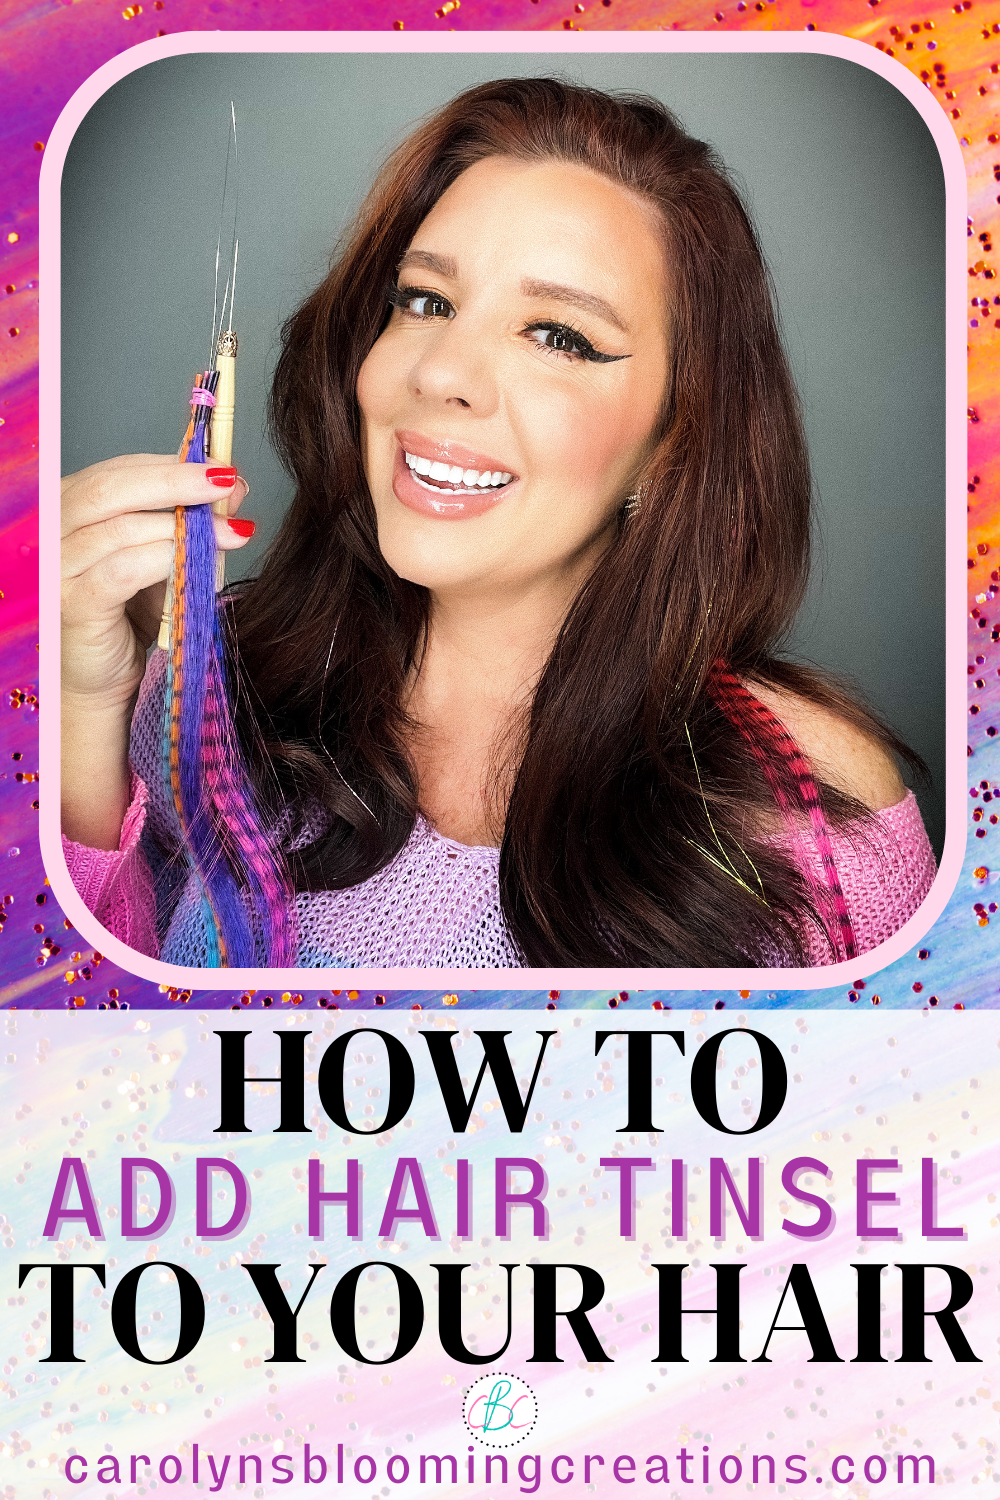 How To Add Hair Tinsel To Your Own Hair At Home — DIY Home Improvements  Carolyn's Blooming Creations